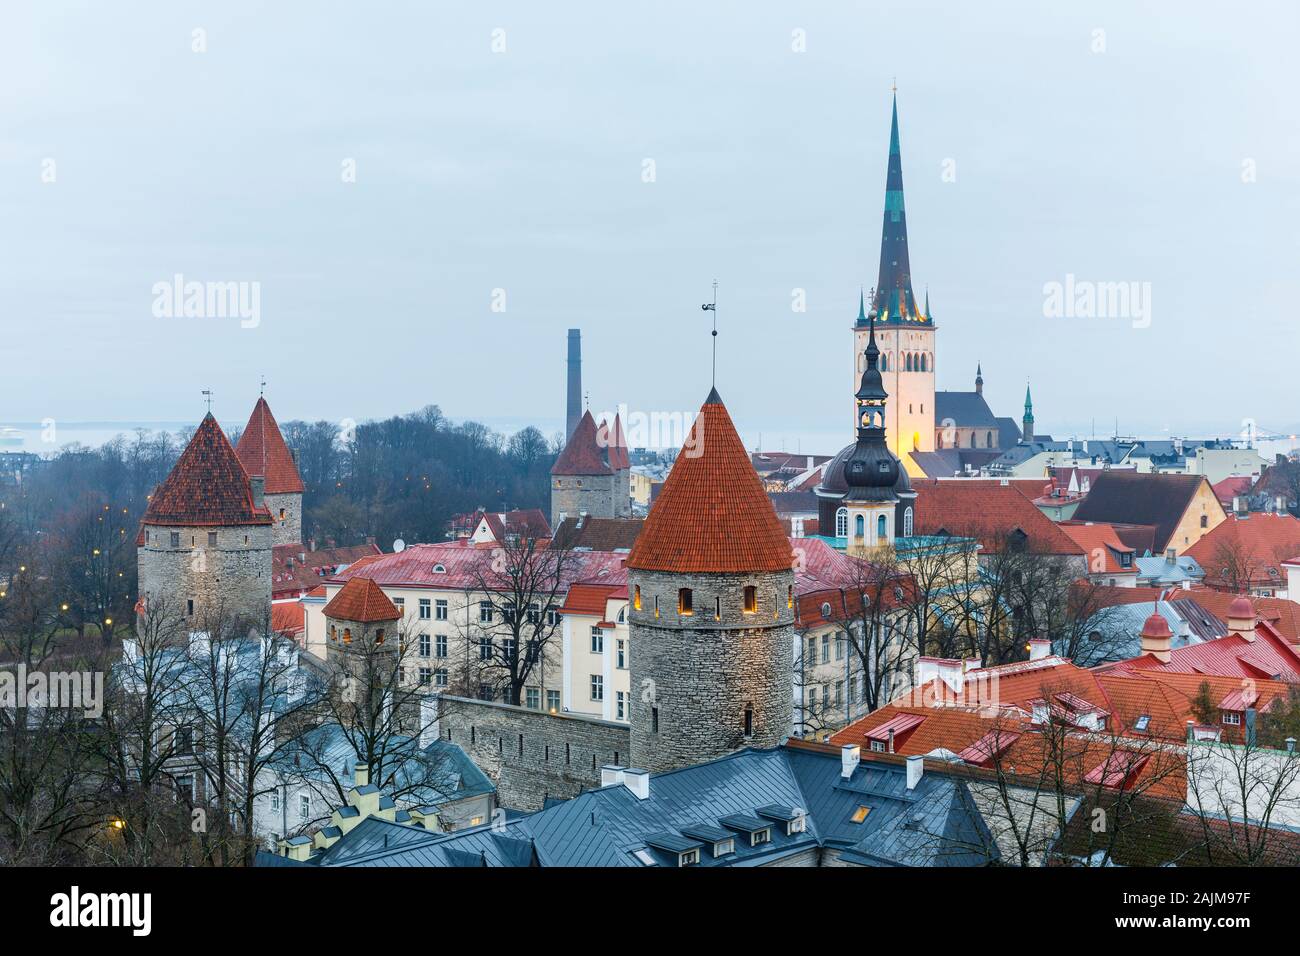 Cityscape of Tallinn old town with curtain wall towers and church st. Olaf Stock Photo